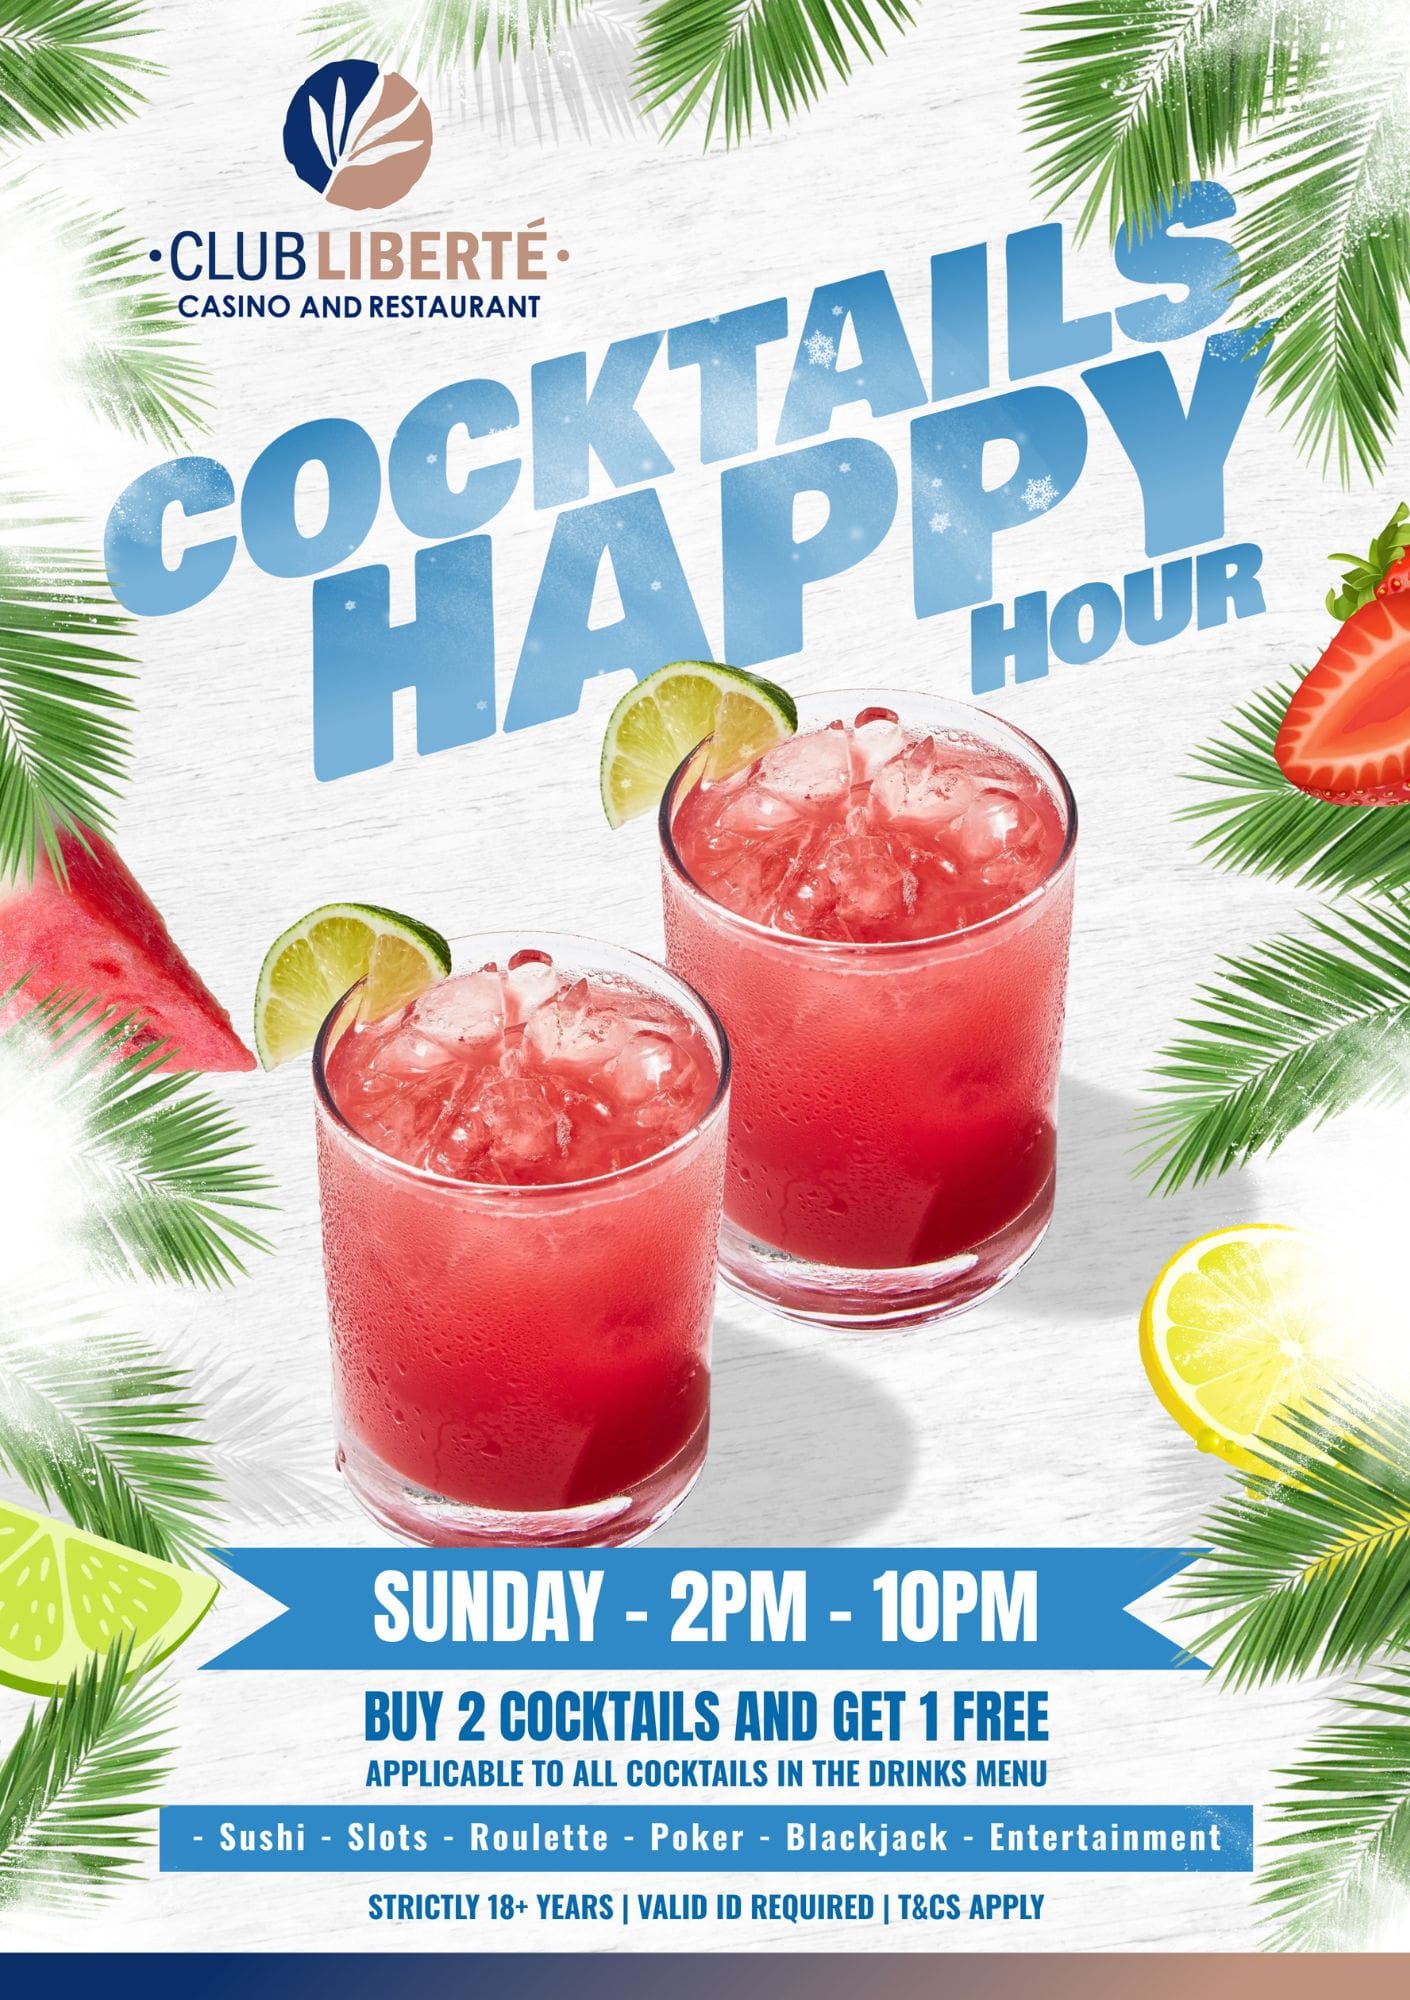 Cocktail Happy Hour - Seychelles